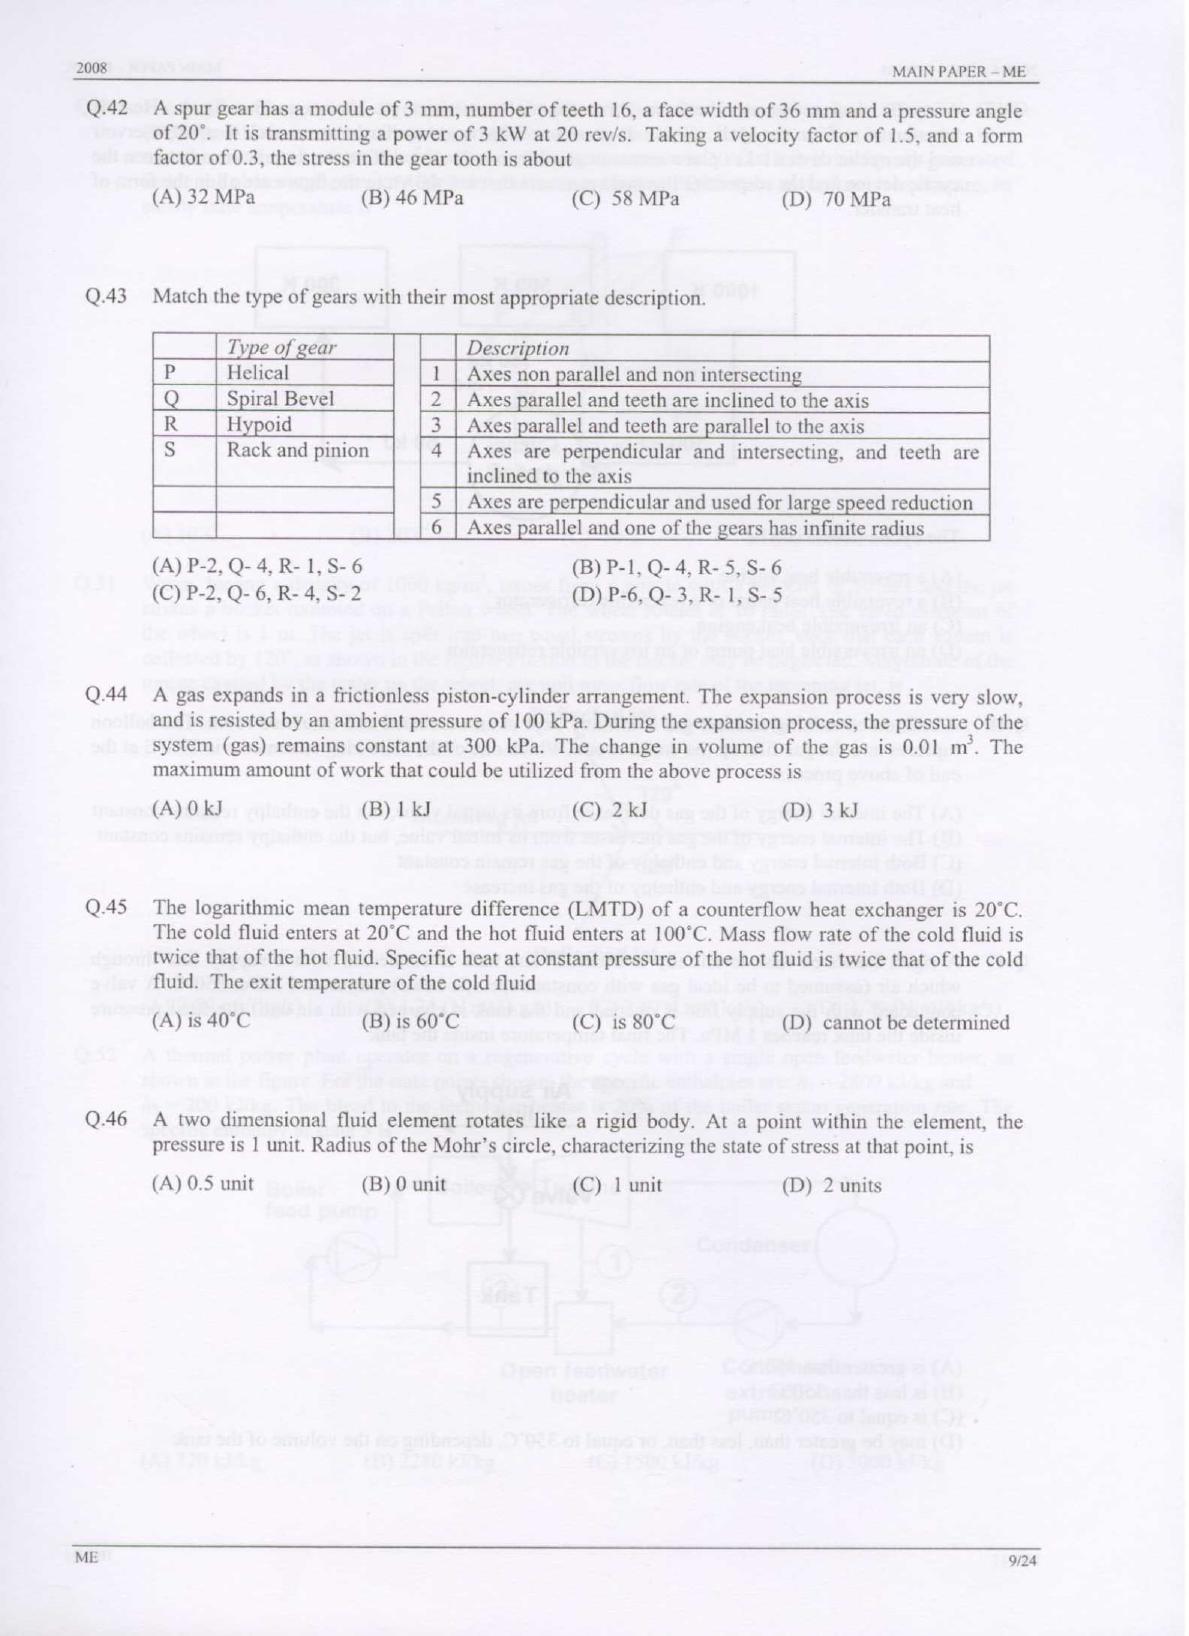 GATE 2008 Mechanical Engineering (ME) Question Paper with Answer Key - Page 9